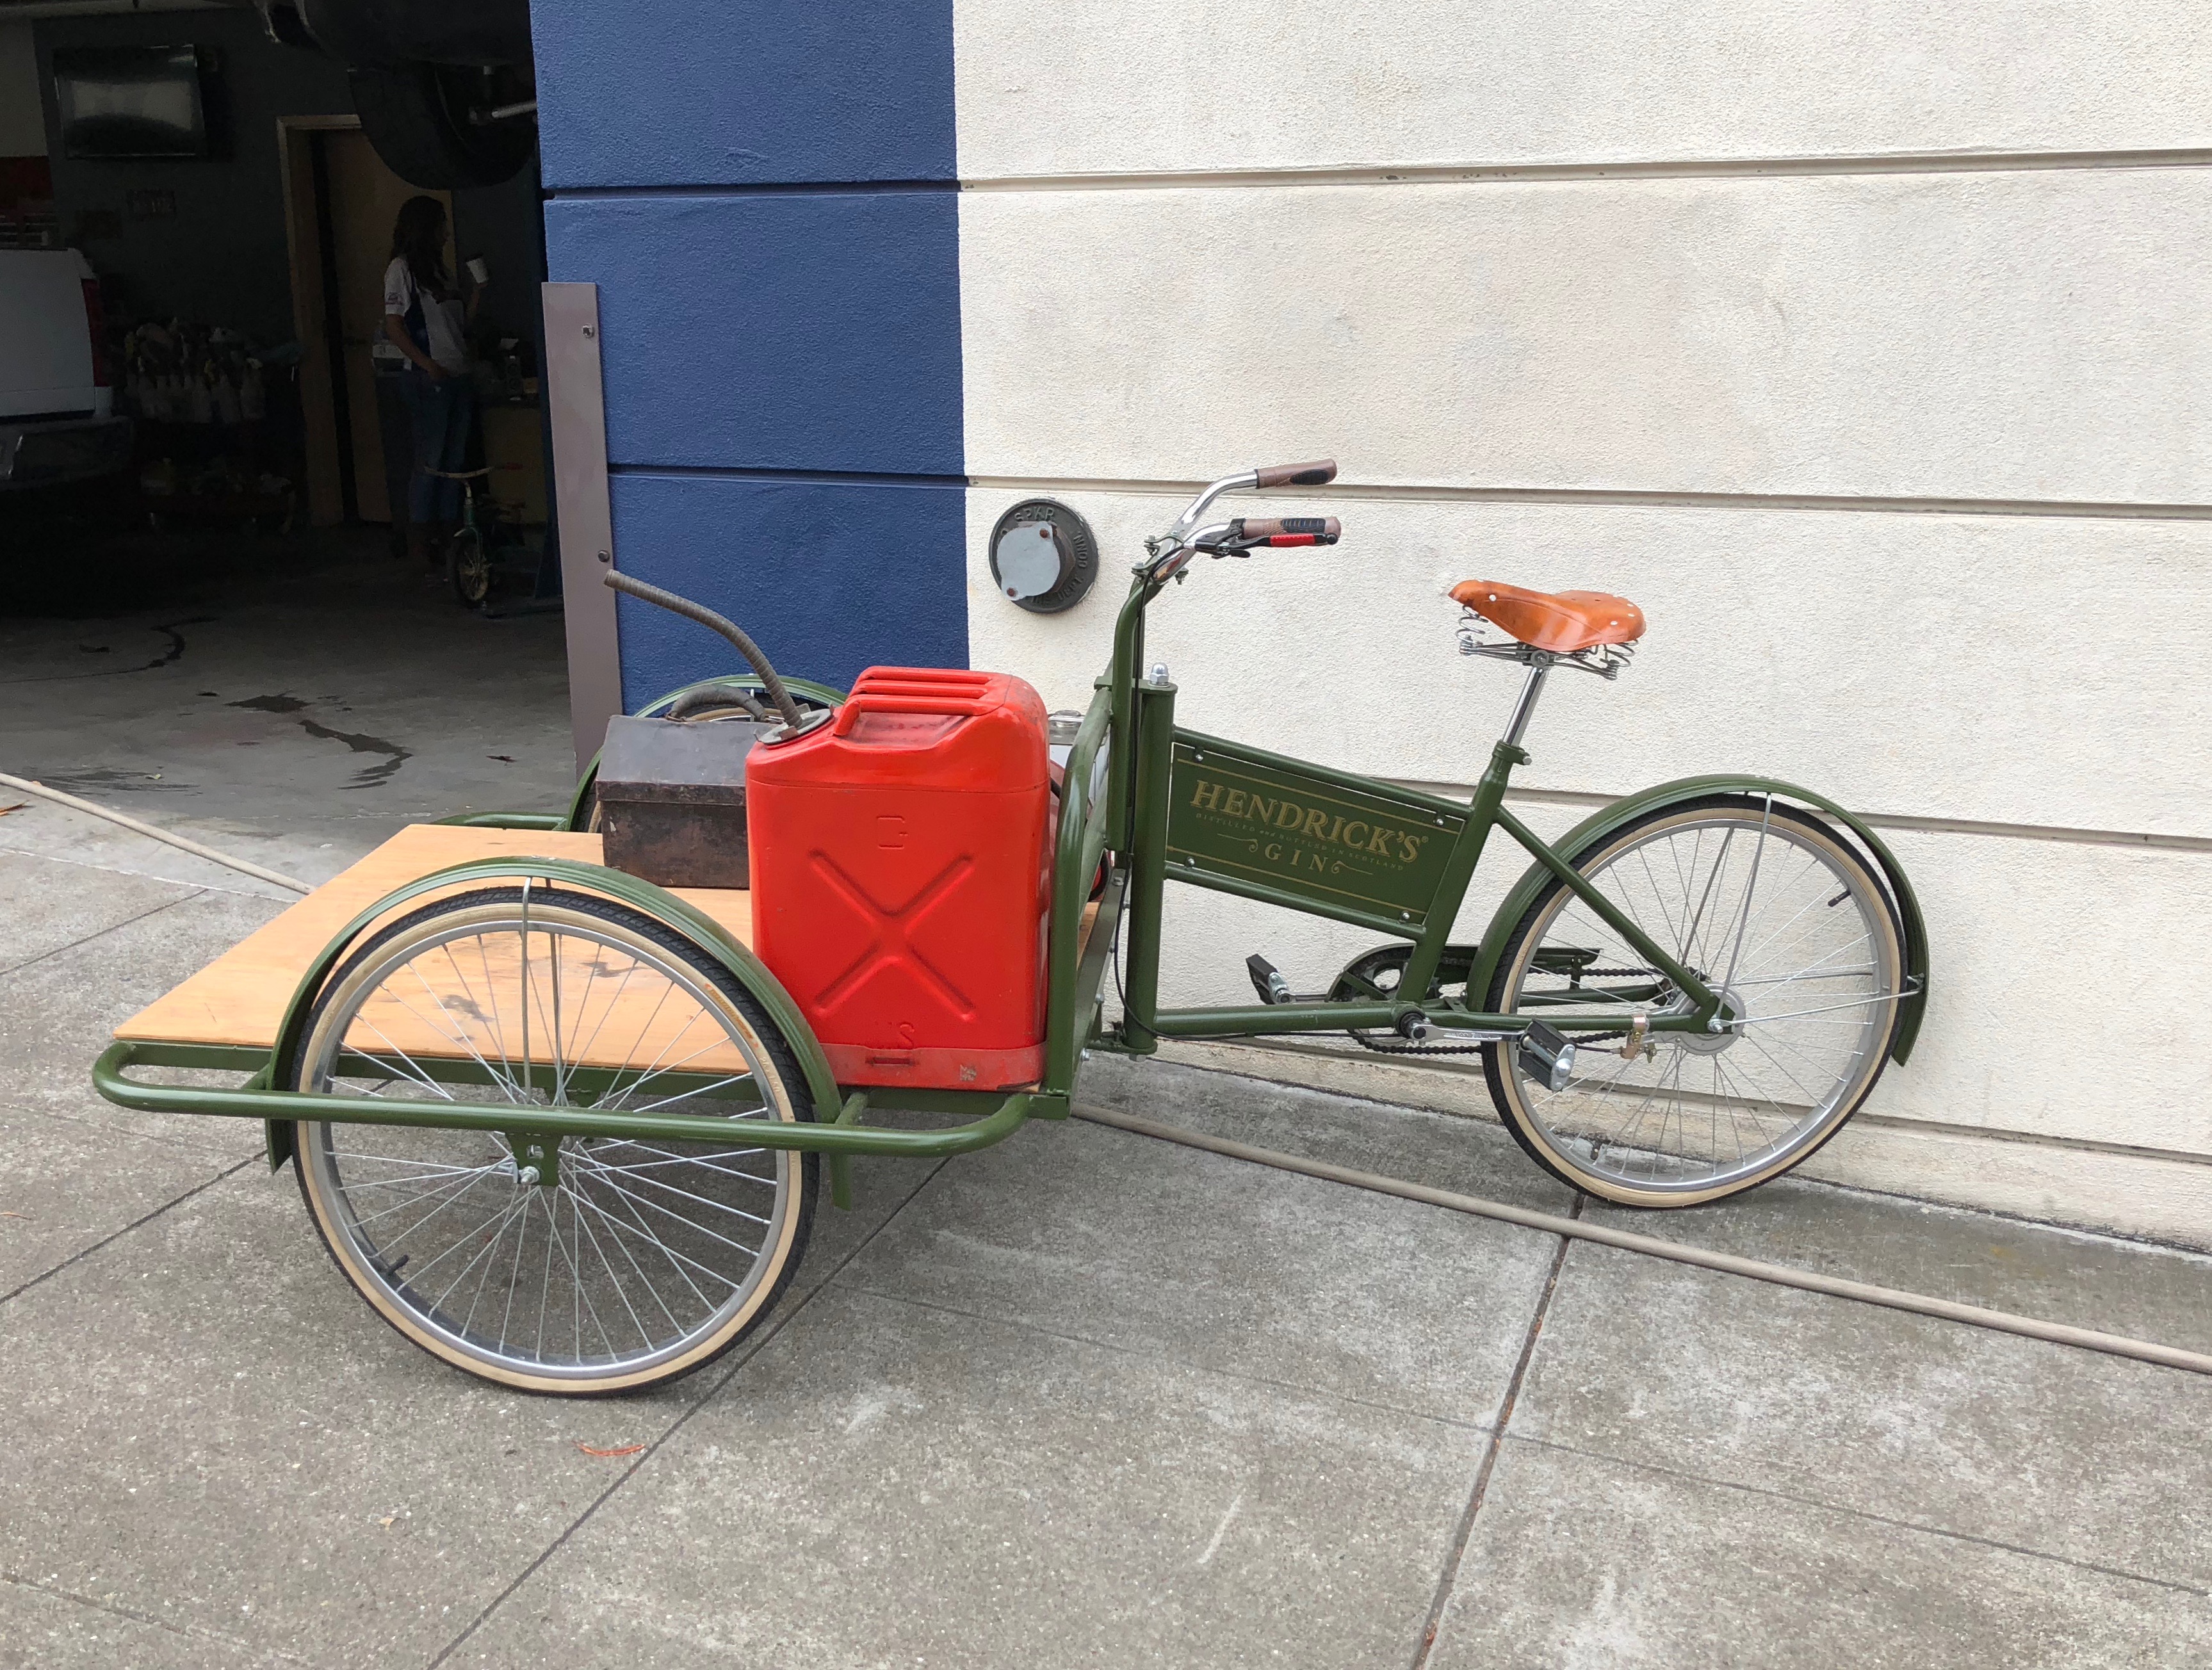 Hendrick's Gin Delivery Bicycle